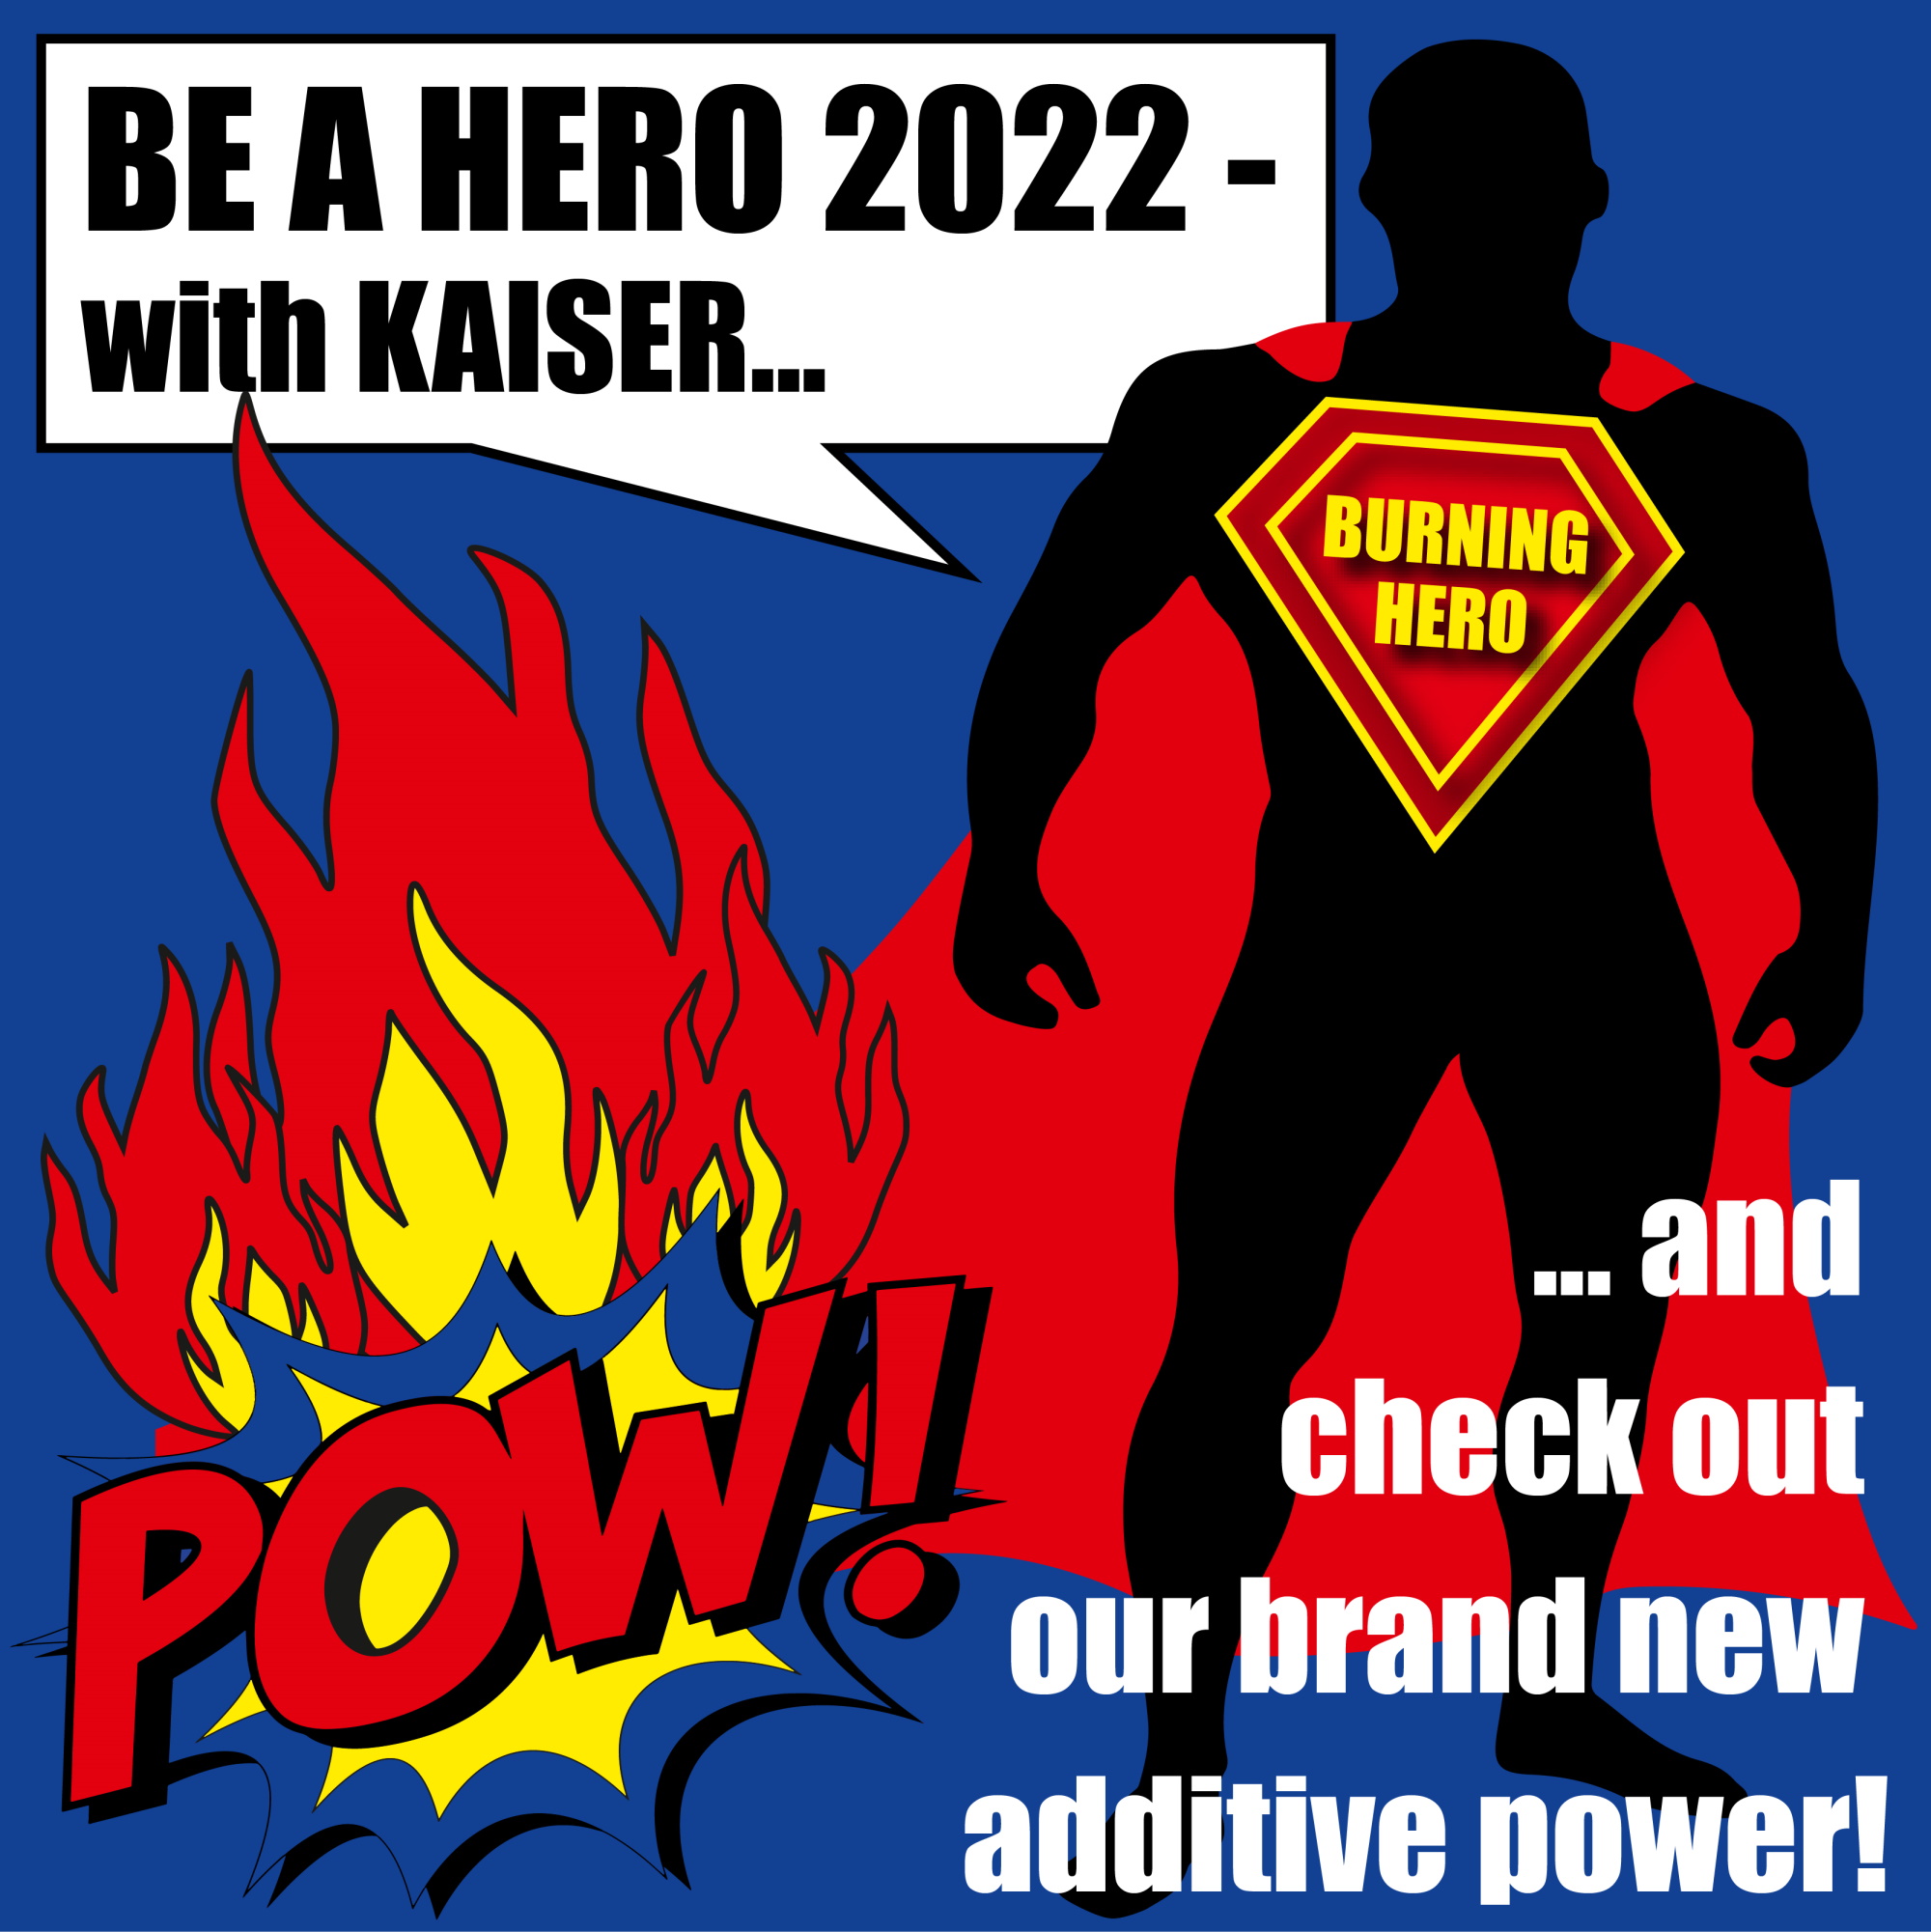 Be a hero 2022 with KAISER and check out our brand new additive power